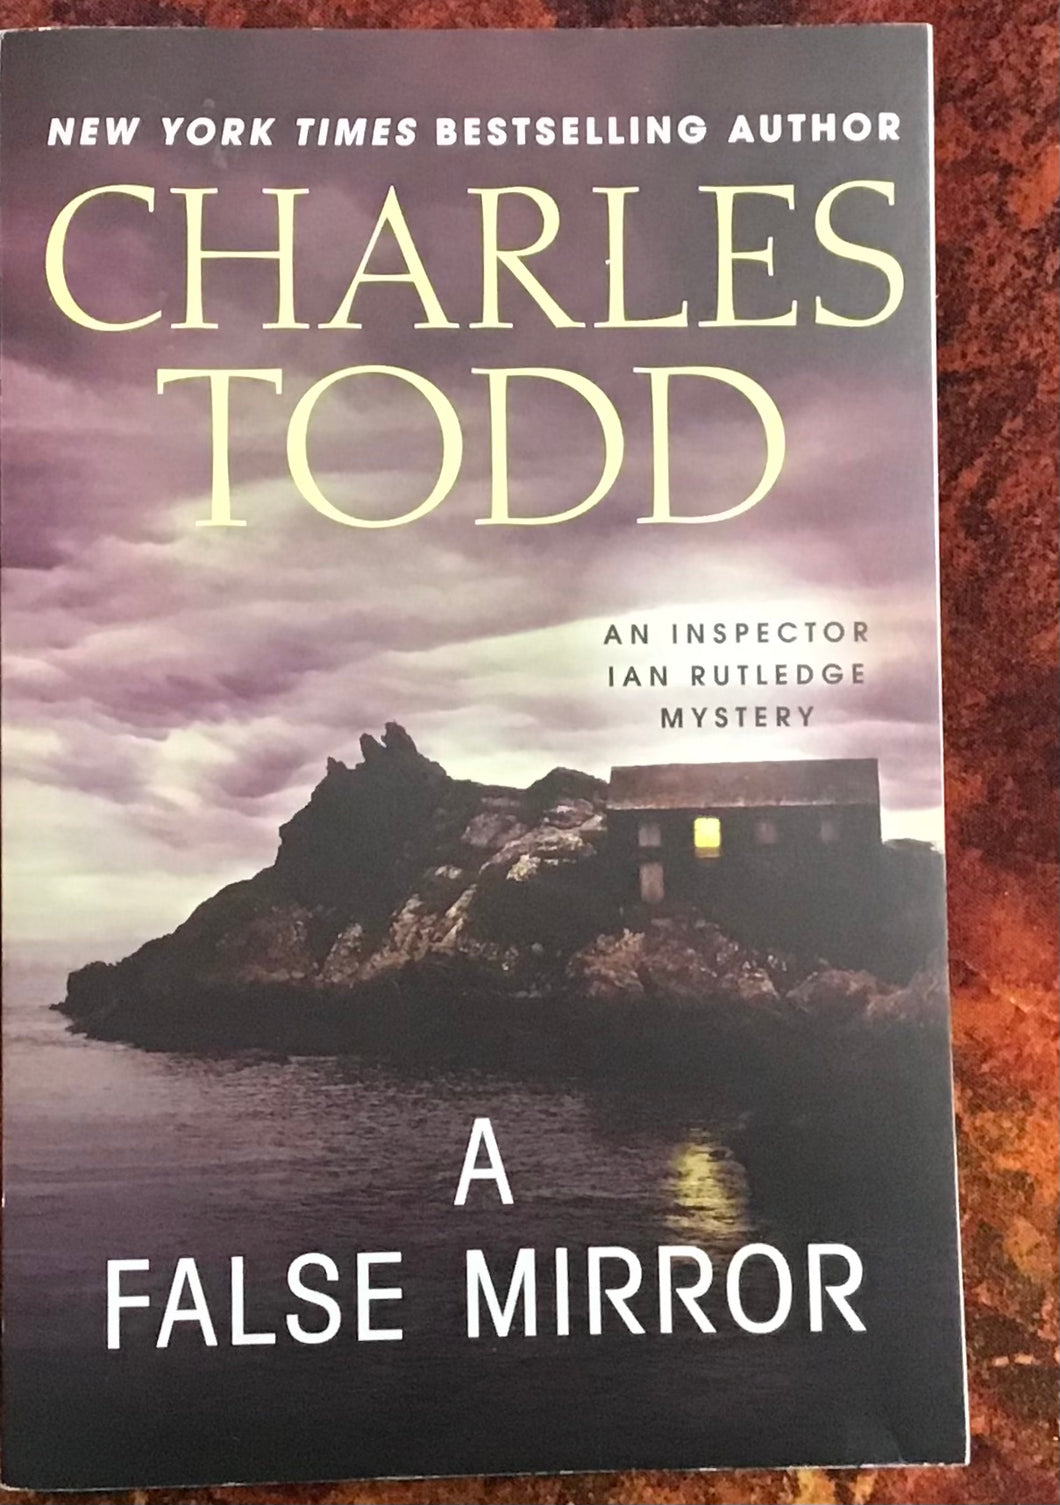 A False Mirror, by Charles Todd